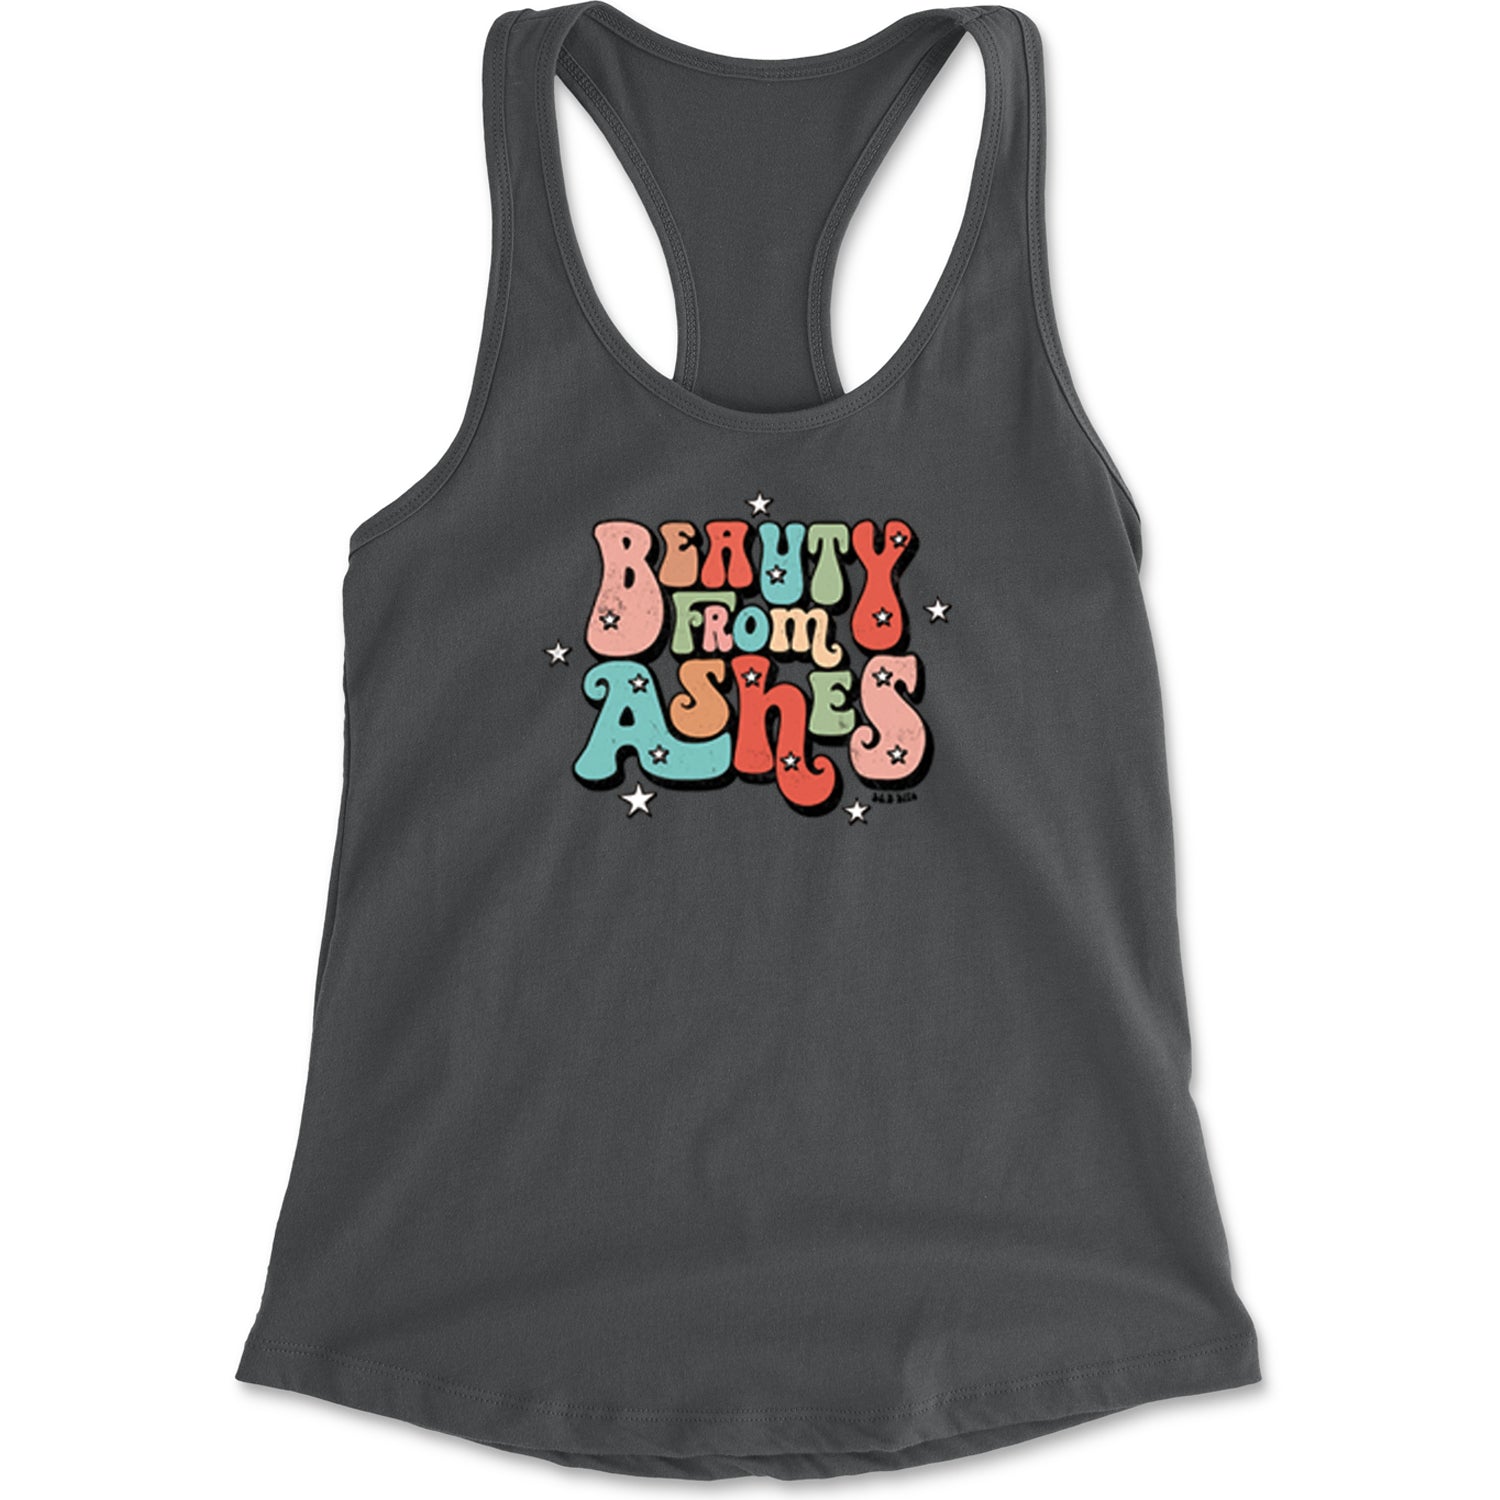 Beauty From Ashes Racerback Tank Top for Women